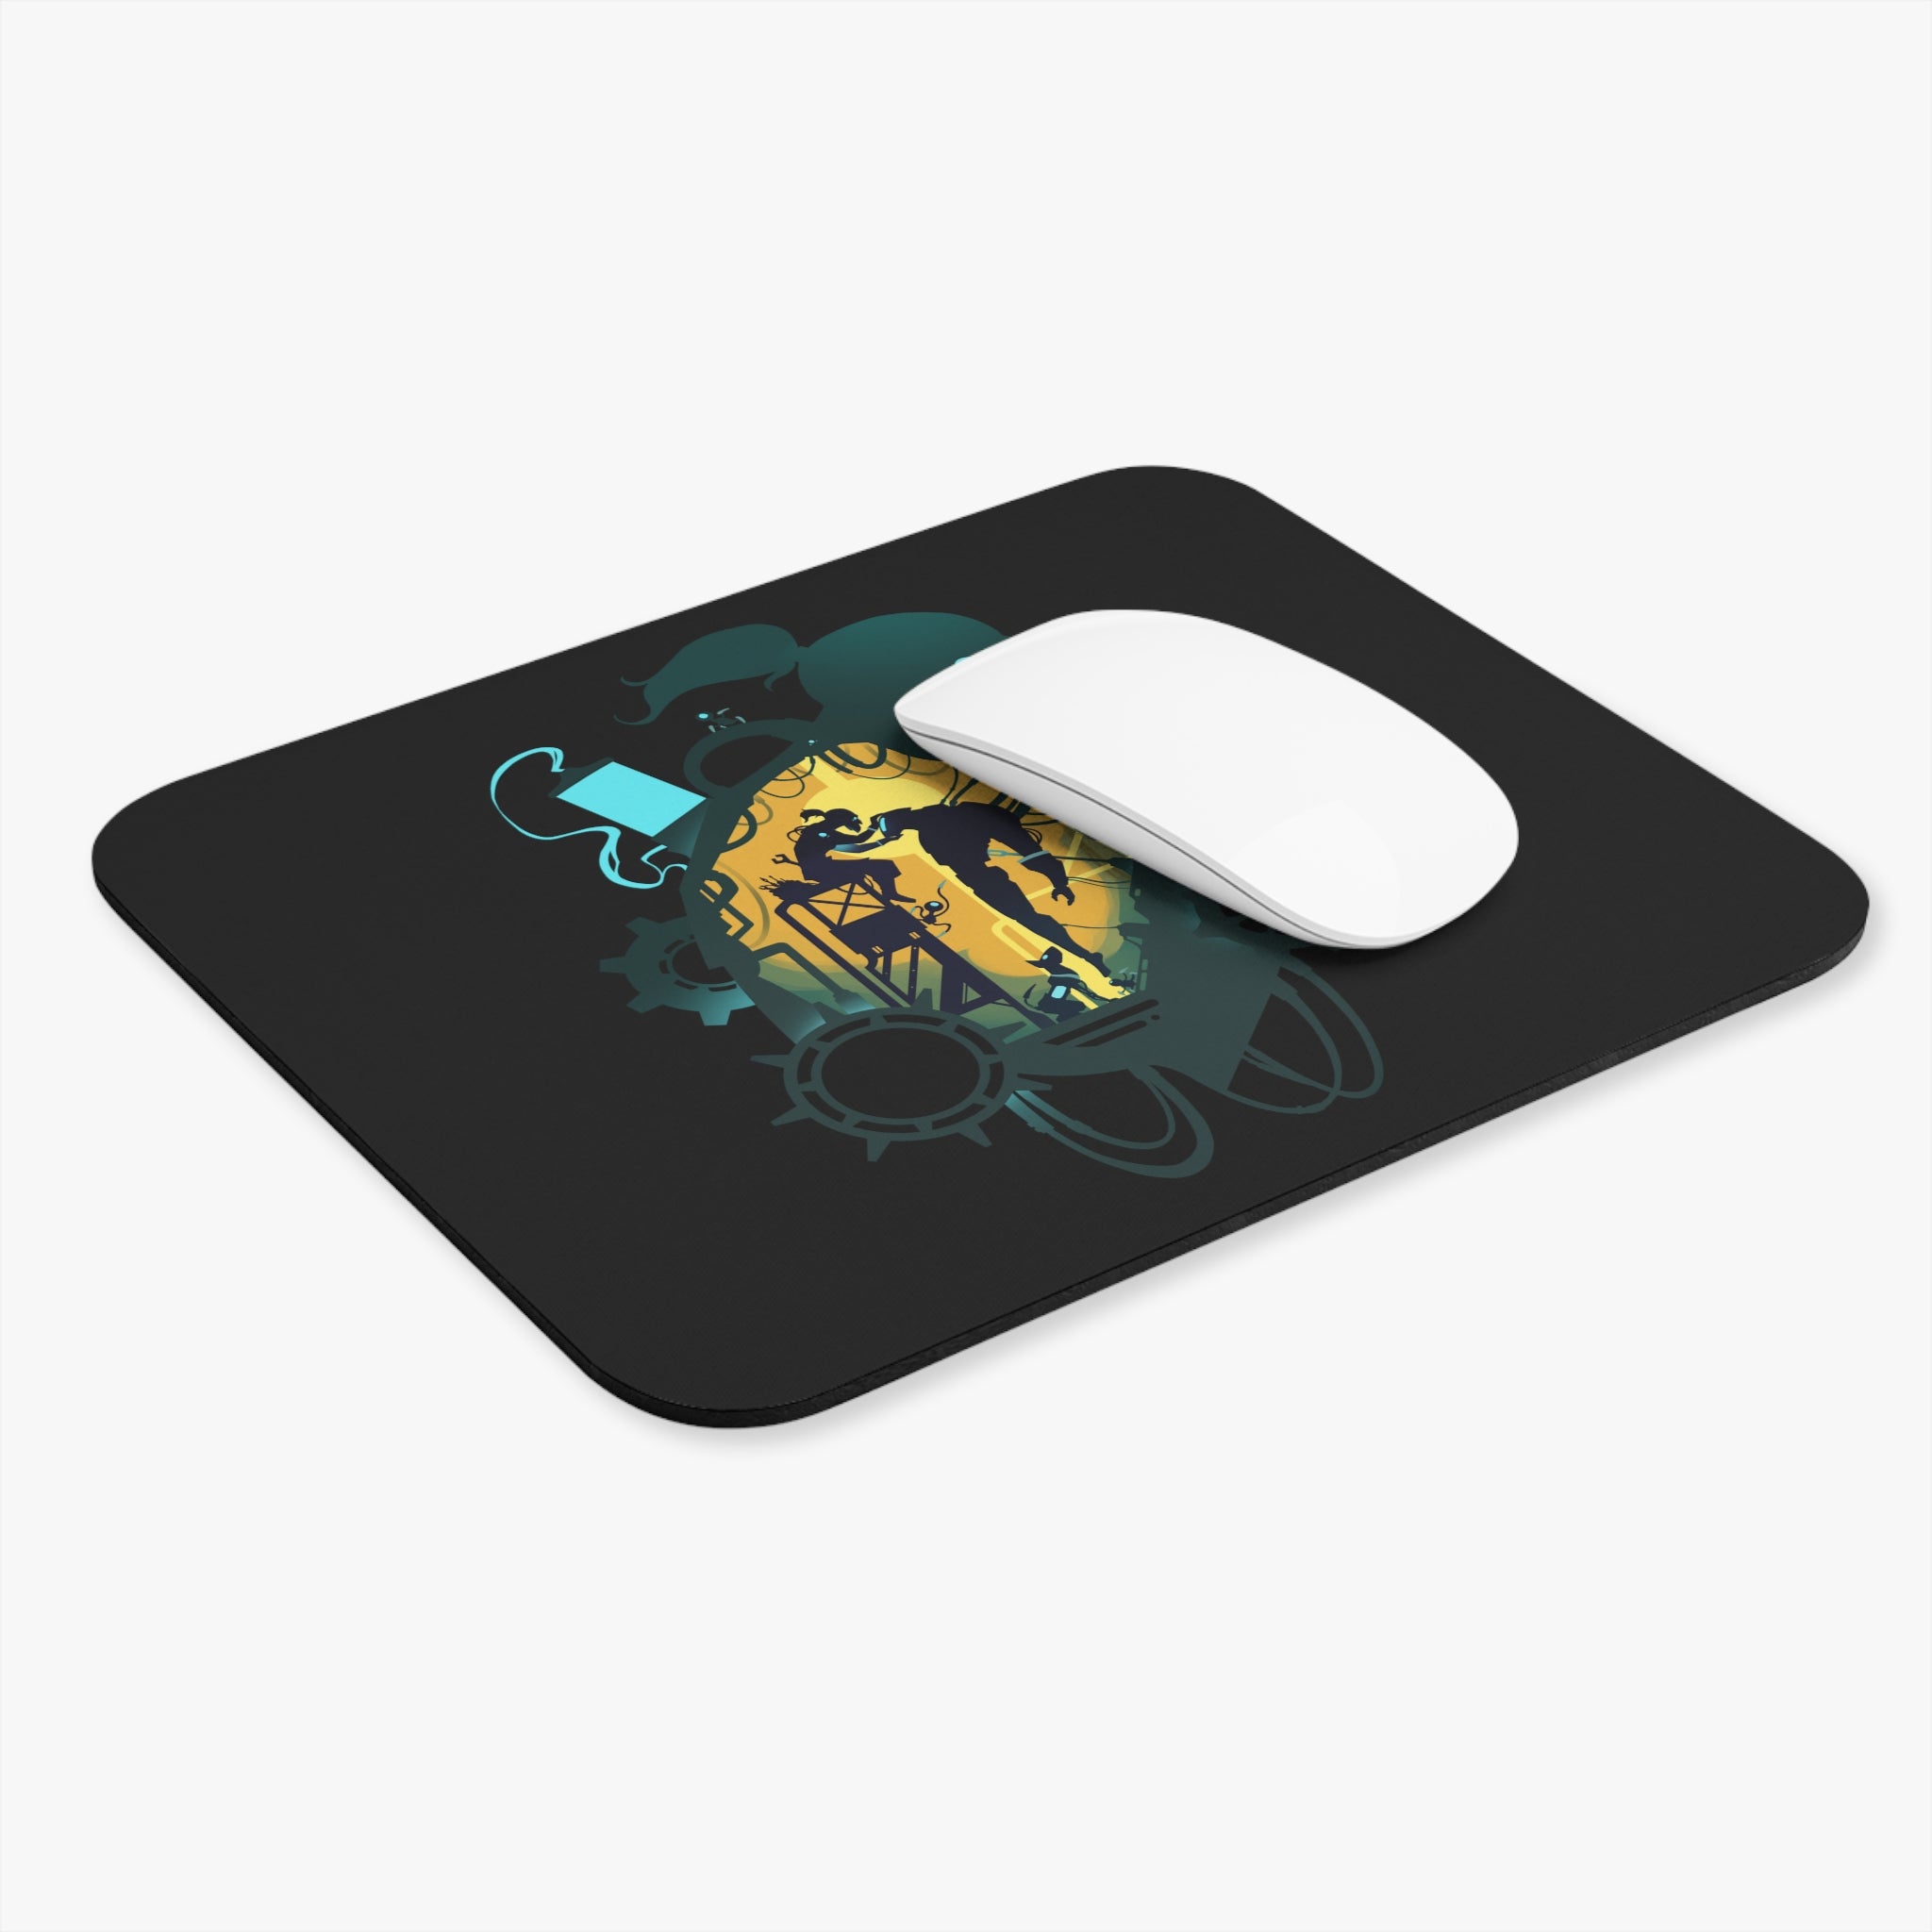 ARTIFICER CLASS SILHOUETTE RECTANGLER MOUSE PAD